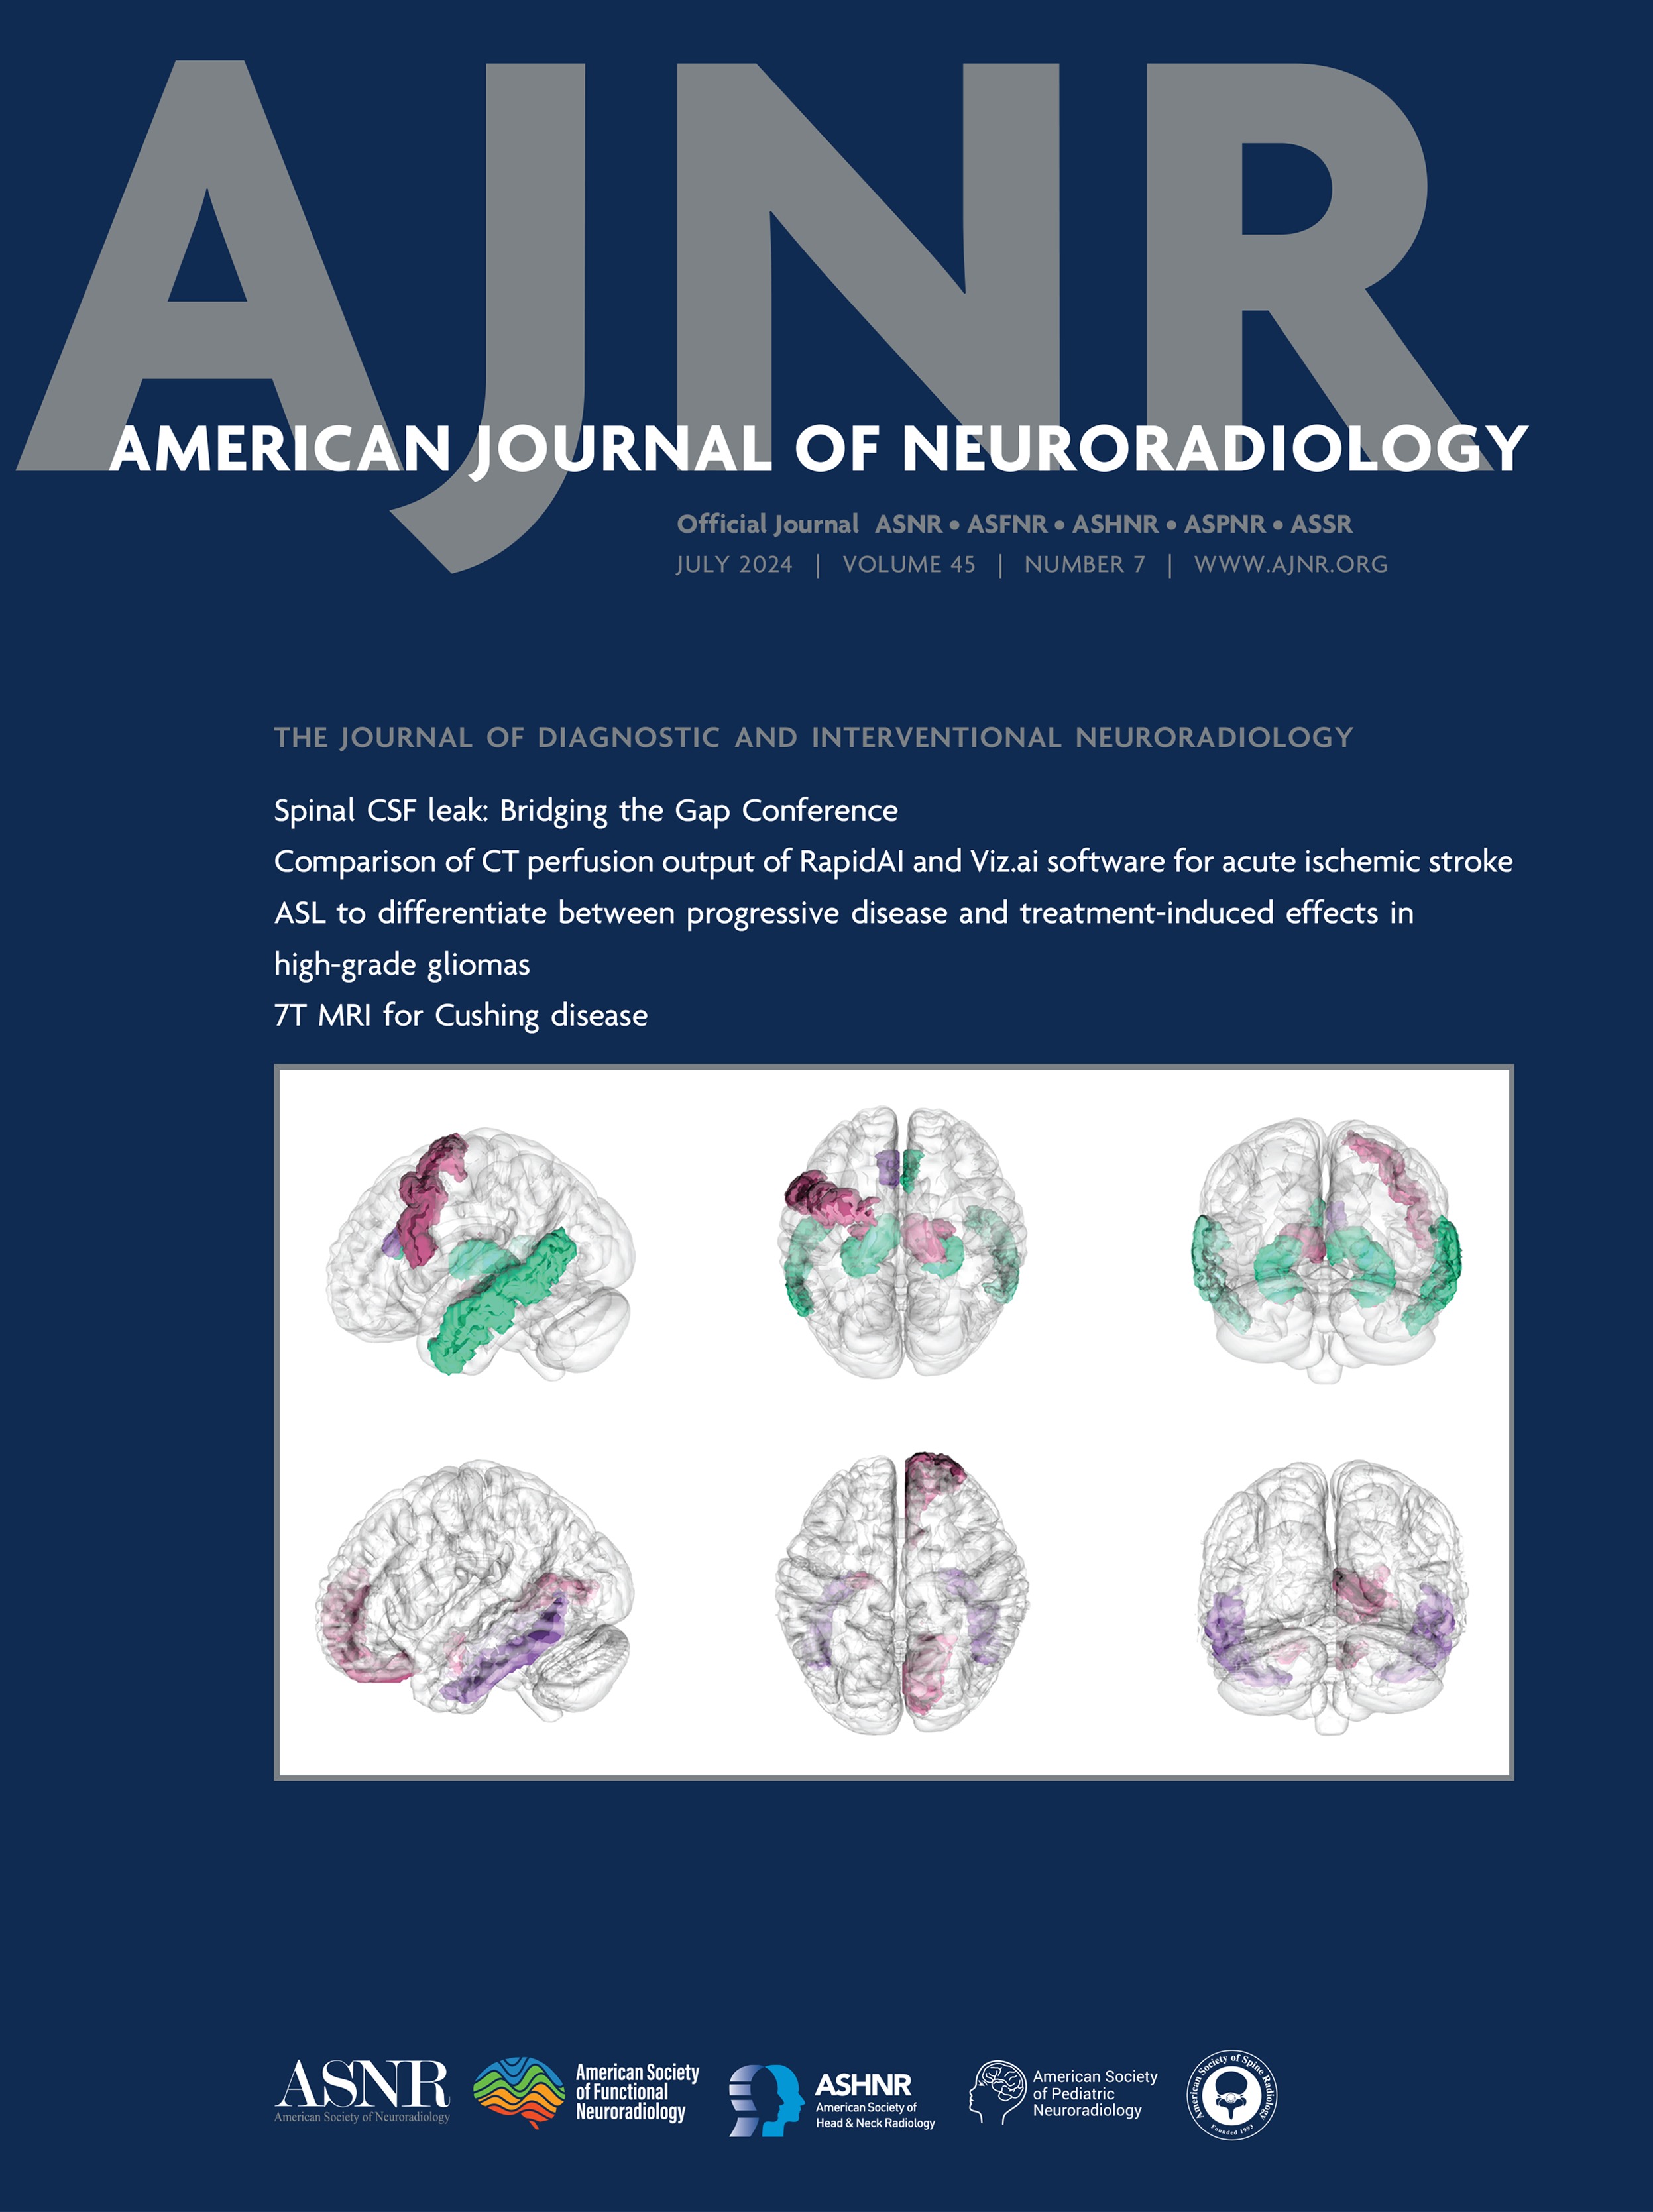 Regarding "Central Vein Sign in Multiple Sclerosis: A Comparison Study of the Diagnostic Performance of 3T versus 7T MRI" [LETTERS]